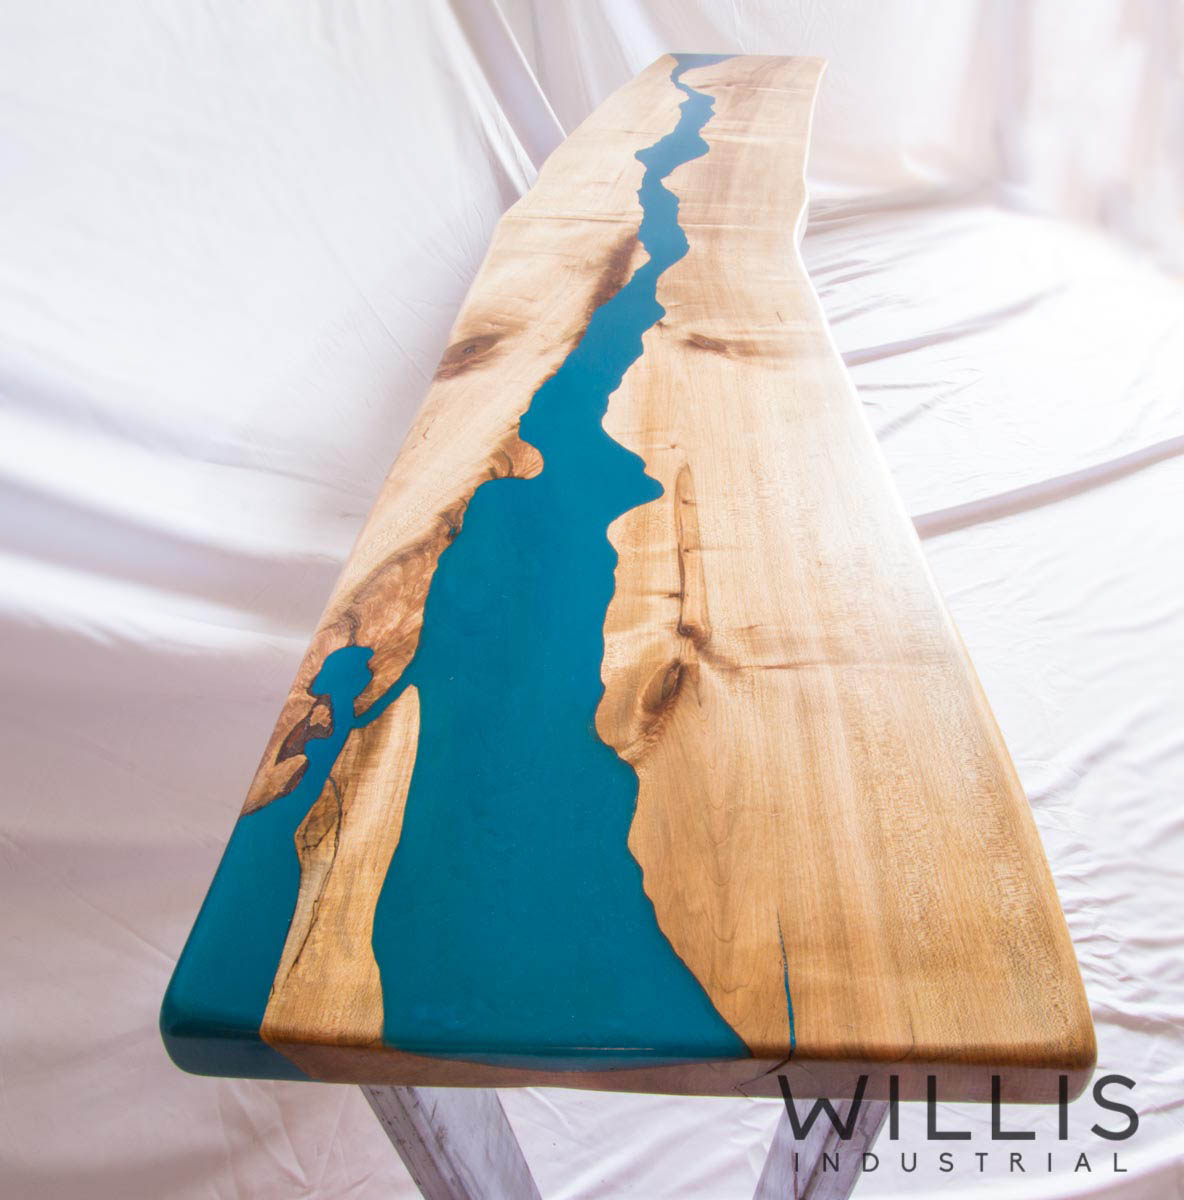 Willis Industrial Furniture | Rustic, Modern Furniture | SE_00001 Bench - blue top epoxy with legs